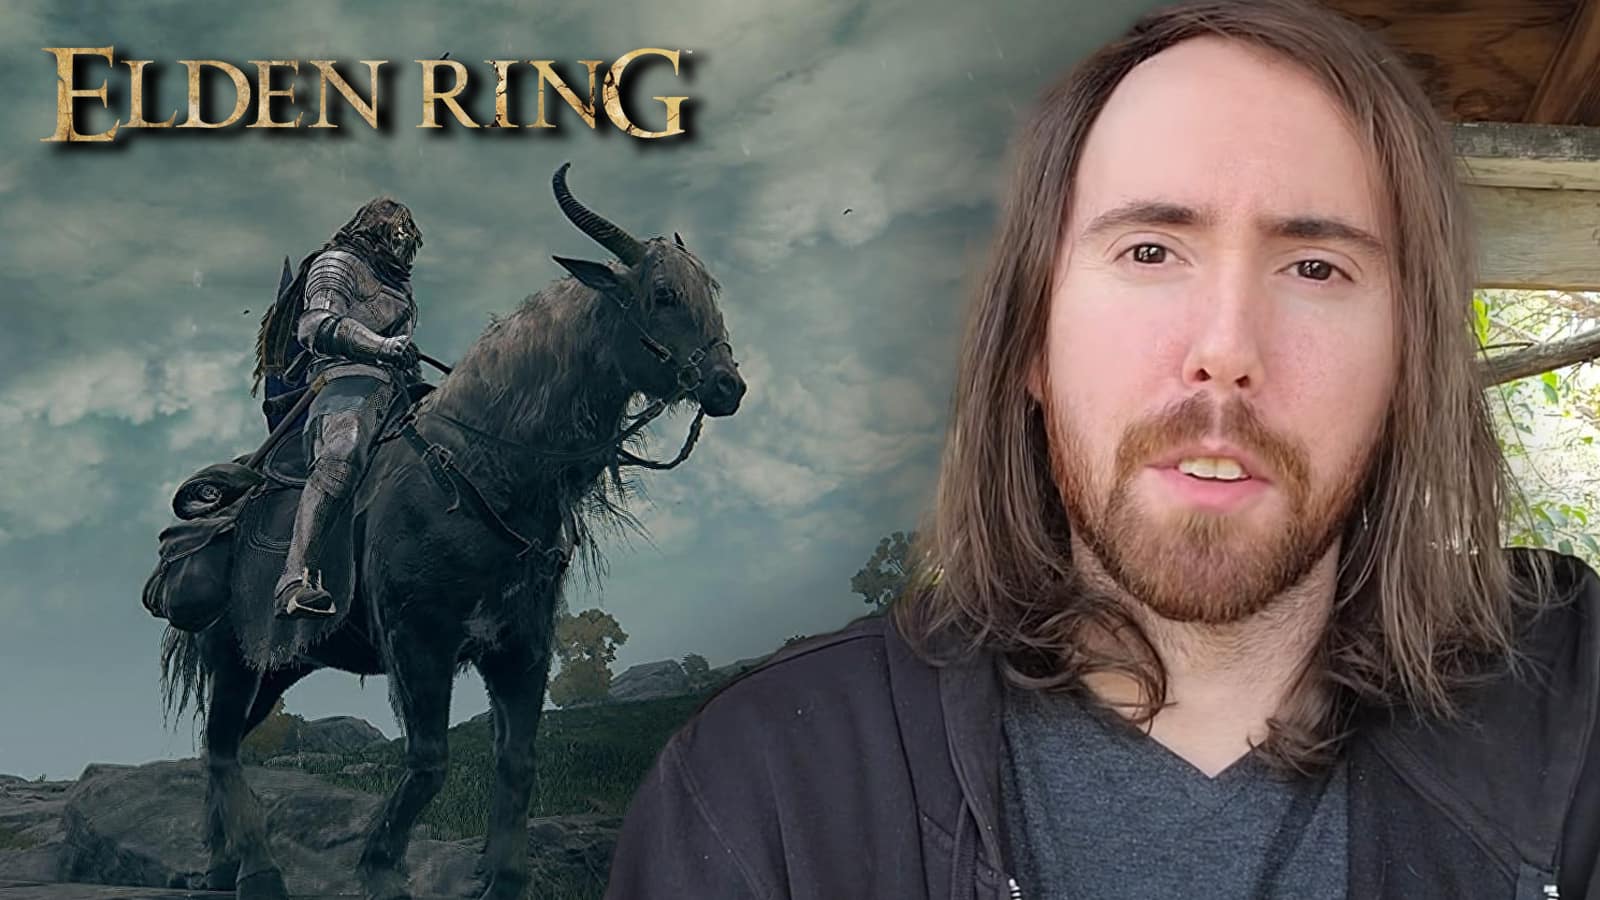 Asmongold explains why Elden Ring is one of the “greatest games